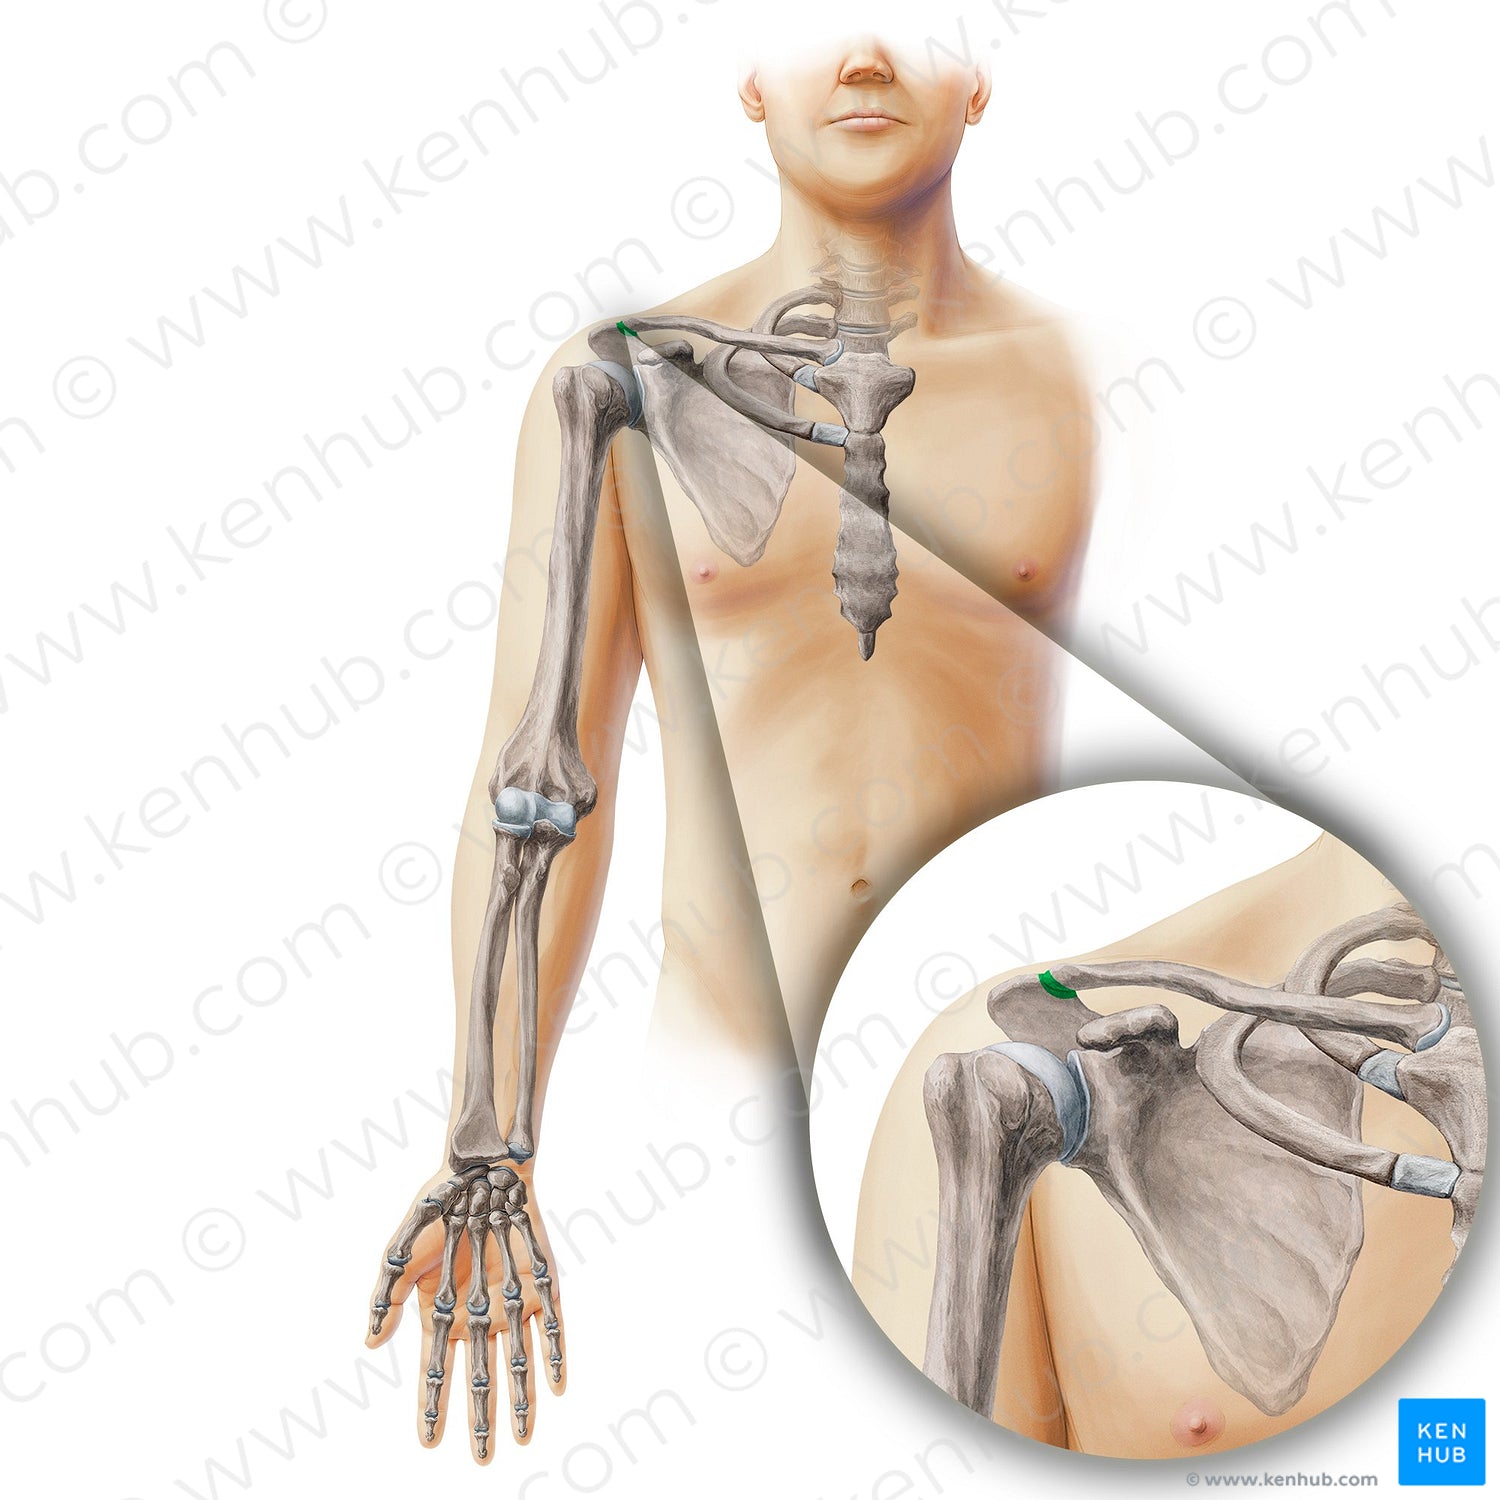 Acromioclavicular joint (#19855)